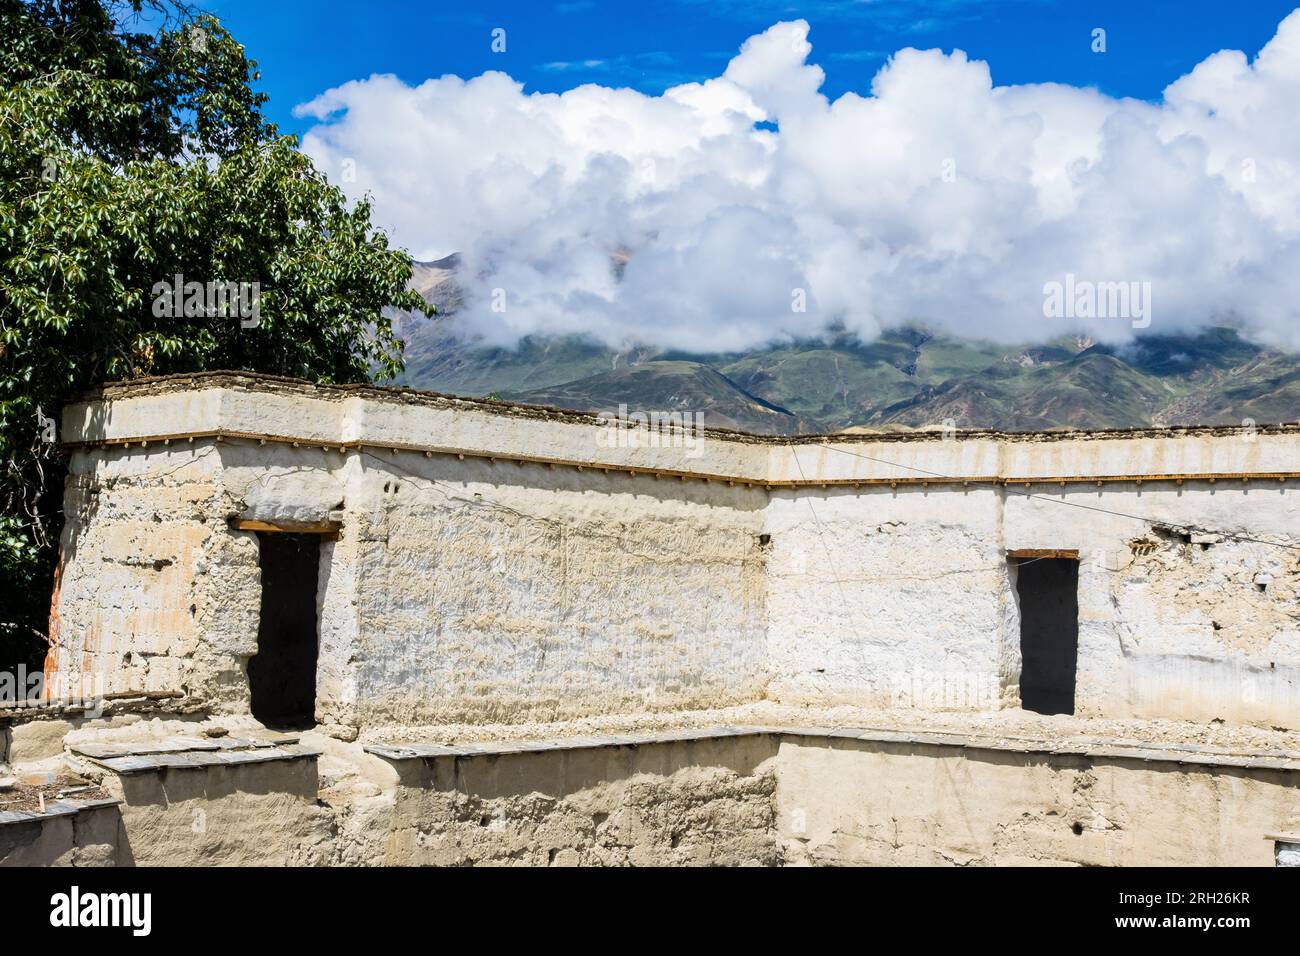 Alleyways, Old House, Monastery, Inside the Wall Kingdom of Lo in Lo Manthang, Upper Mustang, Nepal Stock Photo